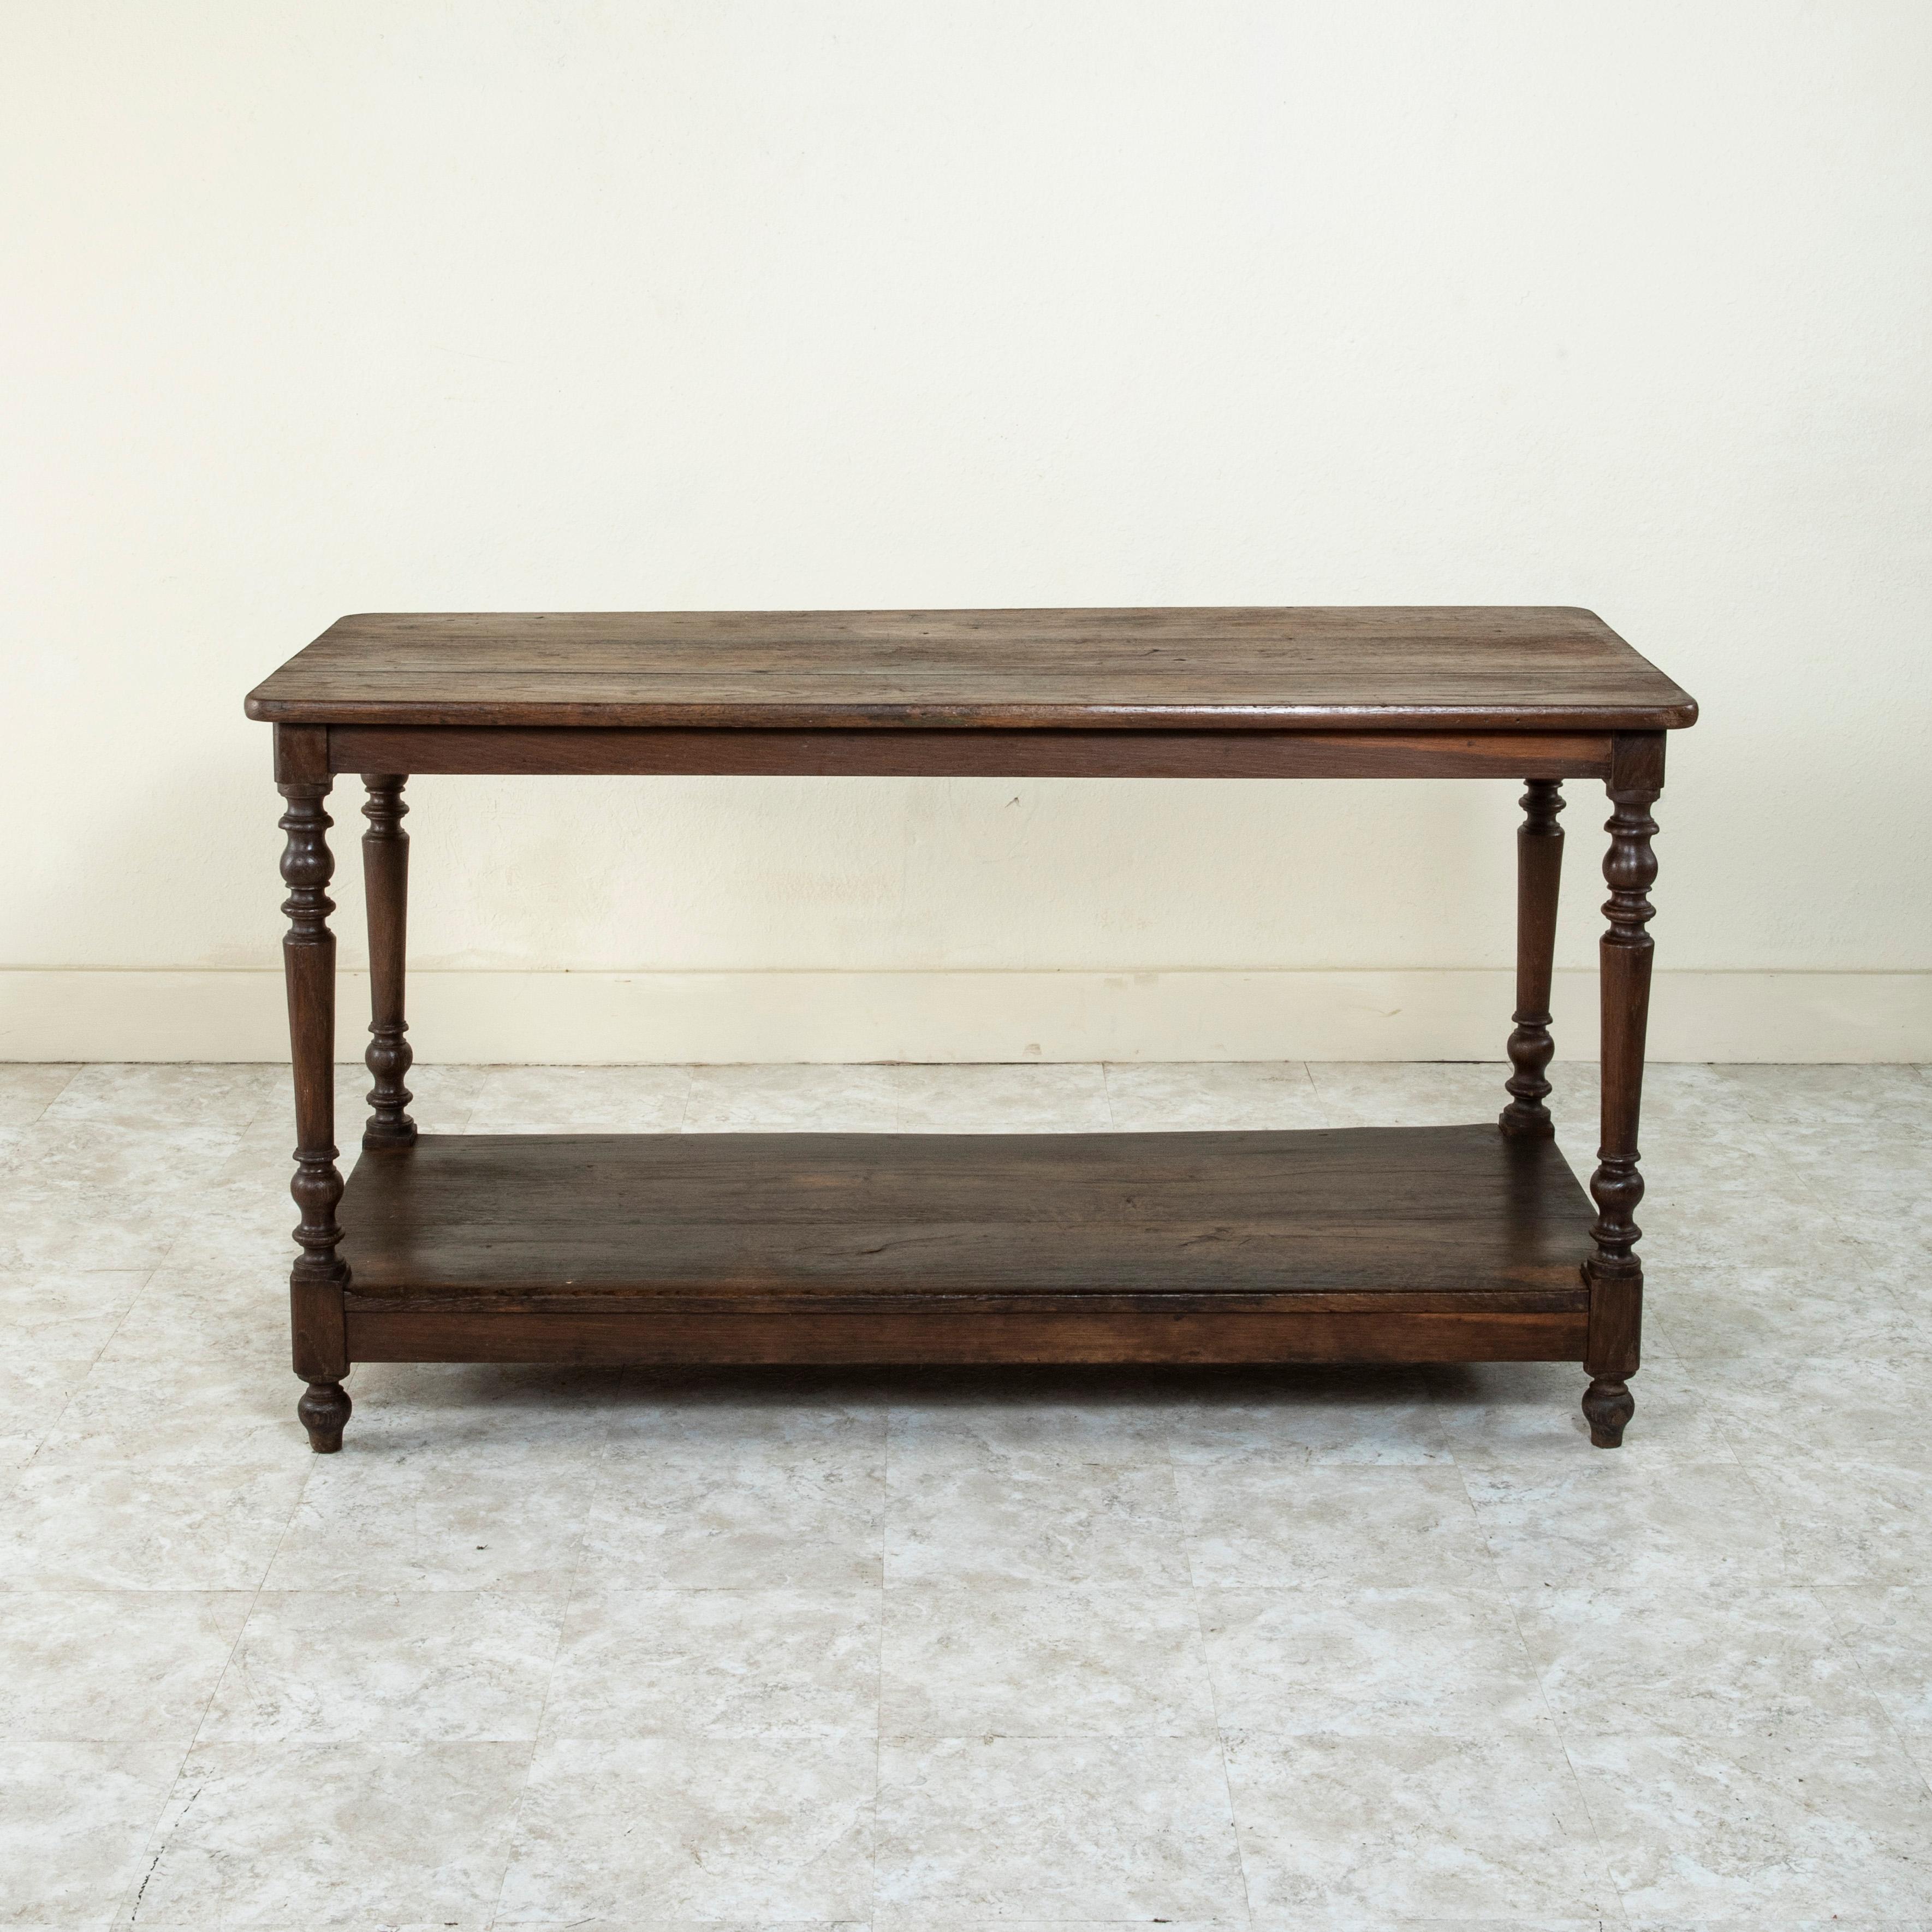 Originally used in a French fabric store to lay out and cut fabric at the turn of the twentieth century, this oak silk trader's table rests on tapered turned legs which support its lower shelf. This draper's table, with its lower shelf for storage